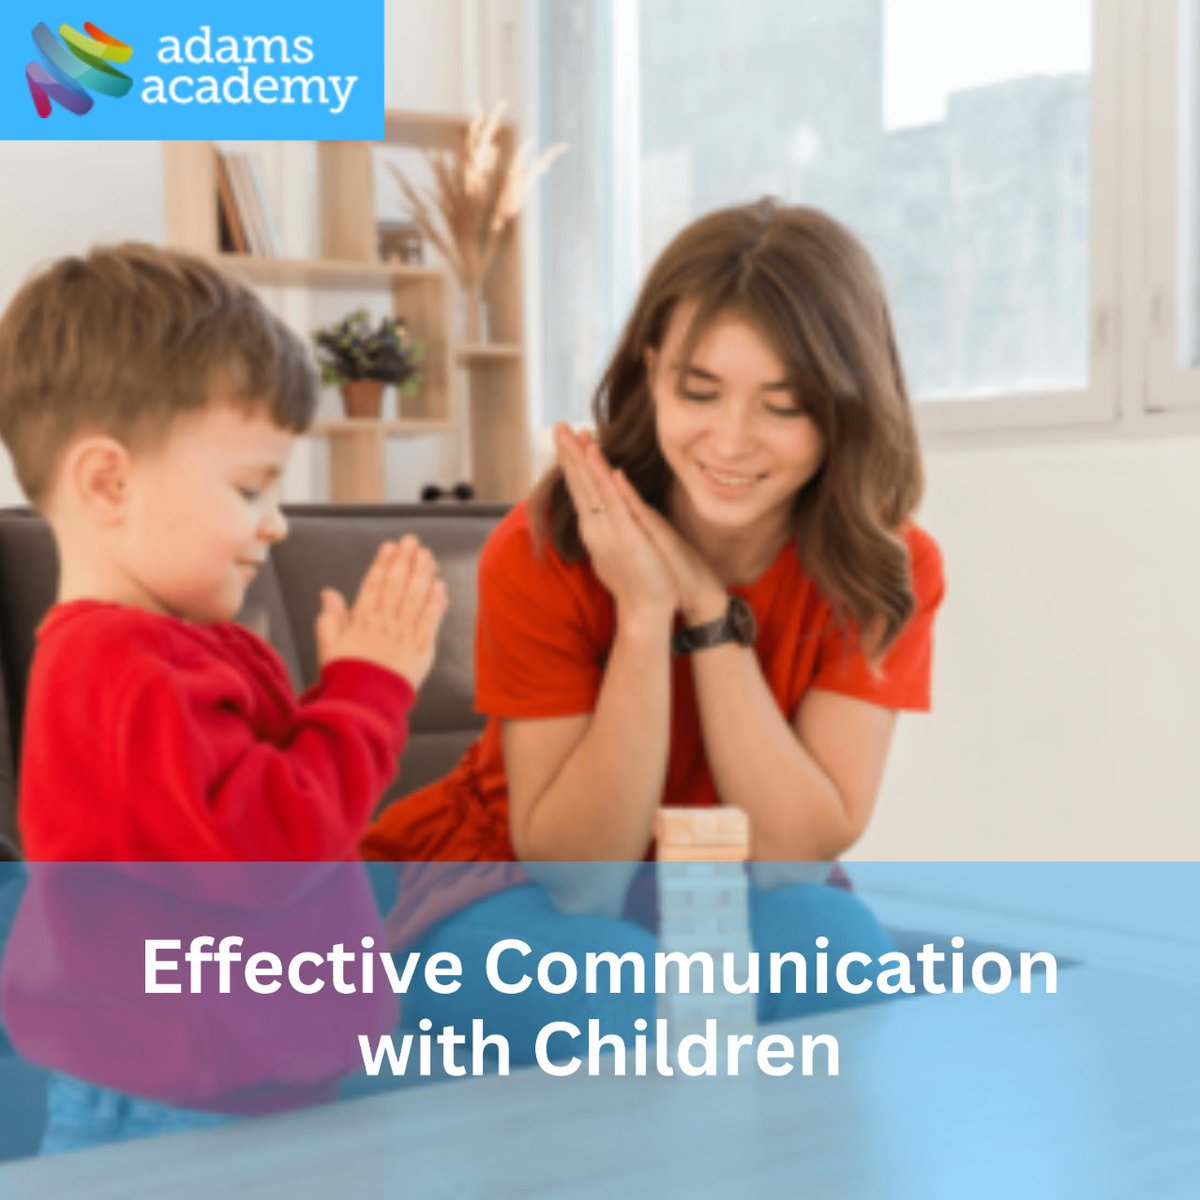 Unlock the secrets to a child’s heart and mind with our Effective Communication with Children course at Adams Academy. Join us to master the art of connection and guidance that lights up little faces with understanding and joy! 
#ChildsPlay #CommunicationKey #AdamsAcademy